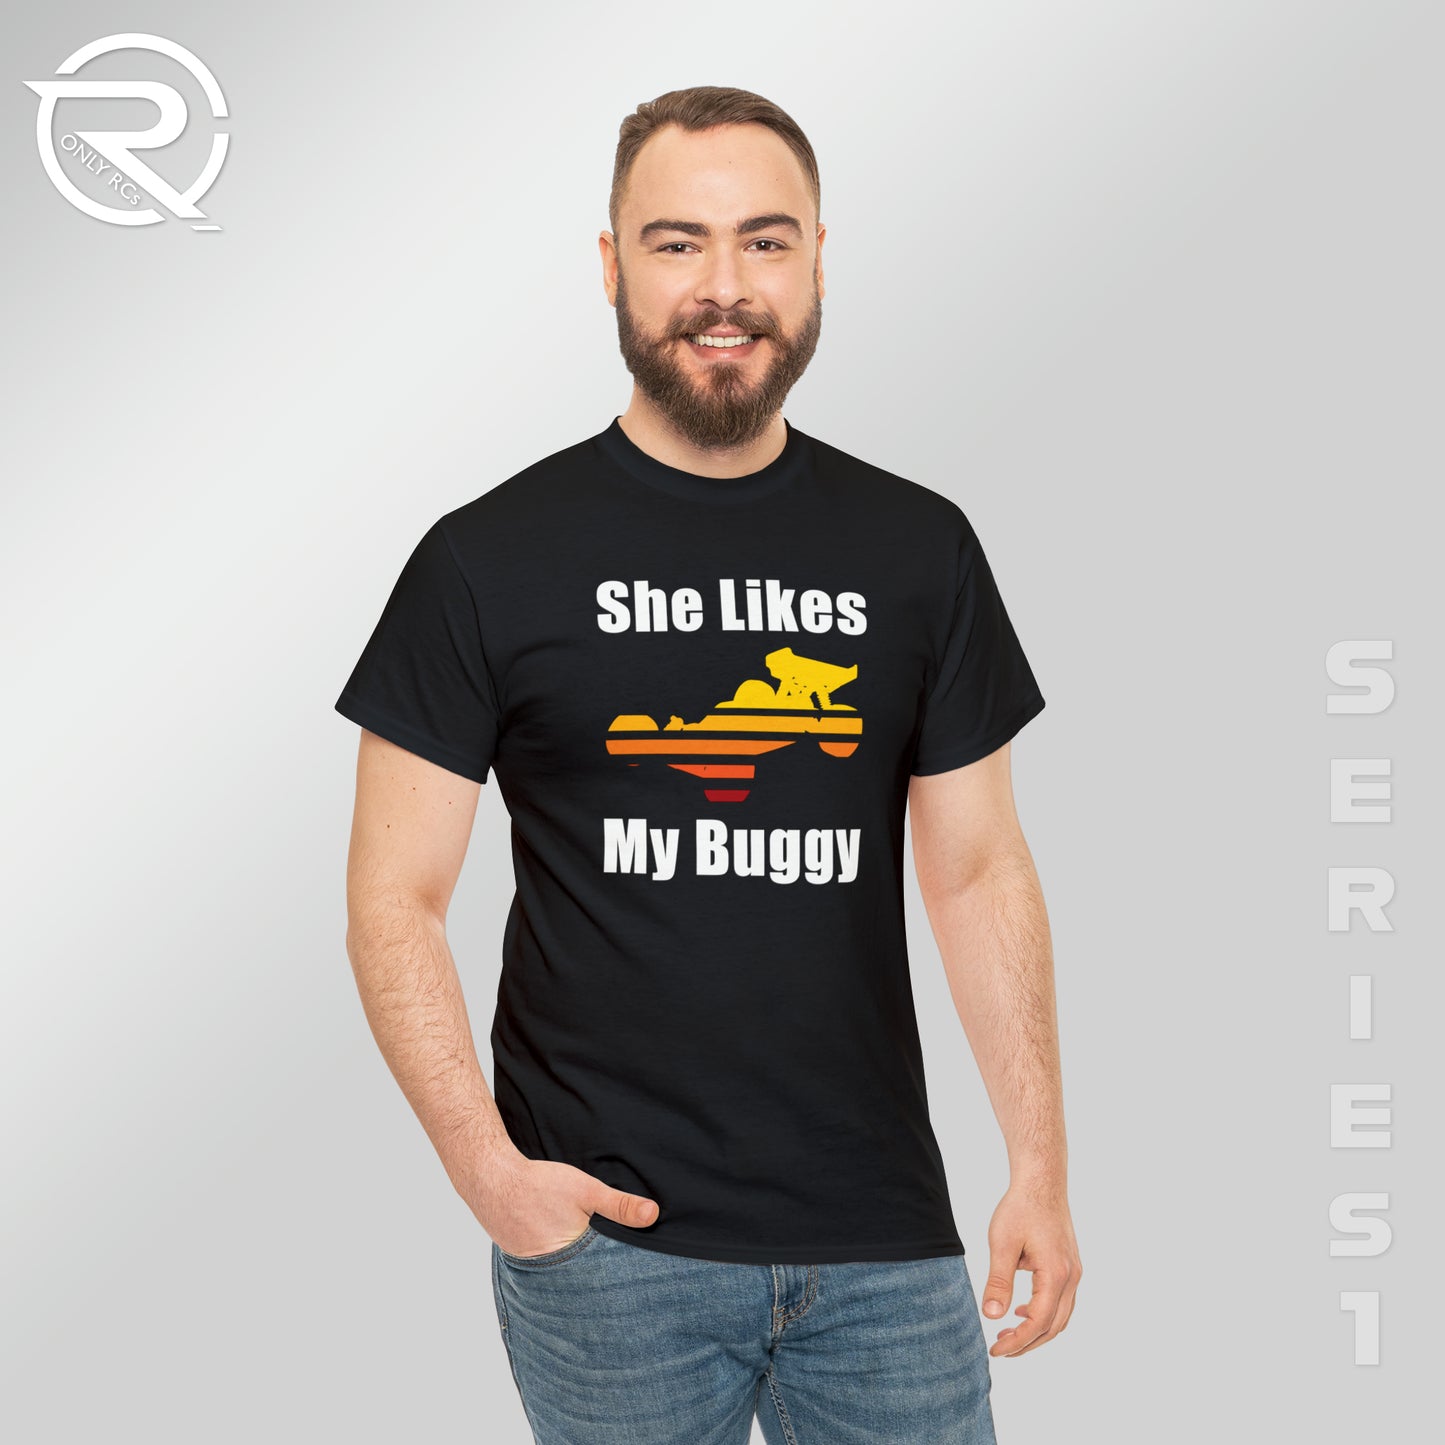 OnlyRCs - She Likes My Buggy Heavy Cotton Tee - Series 1